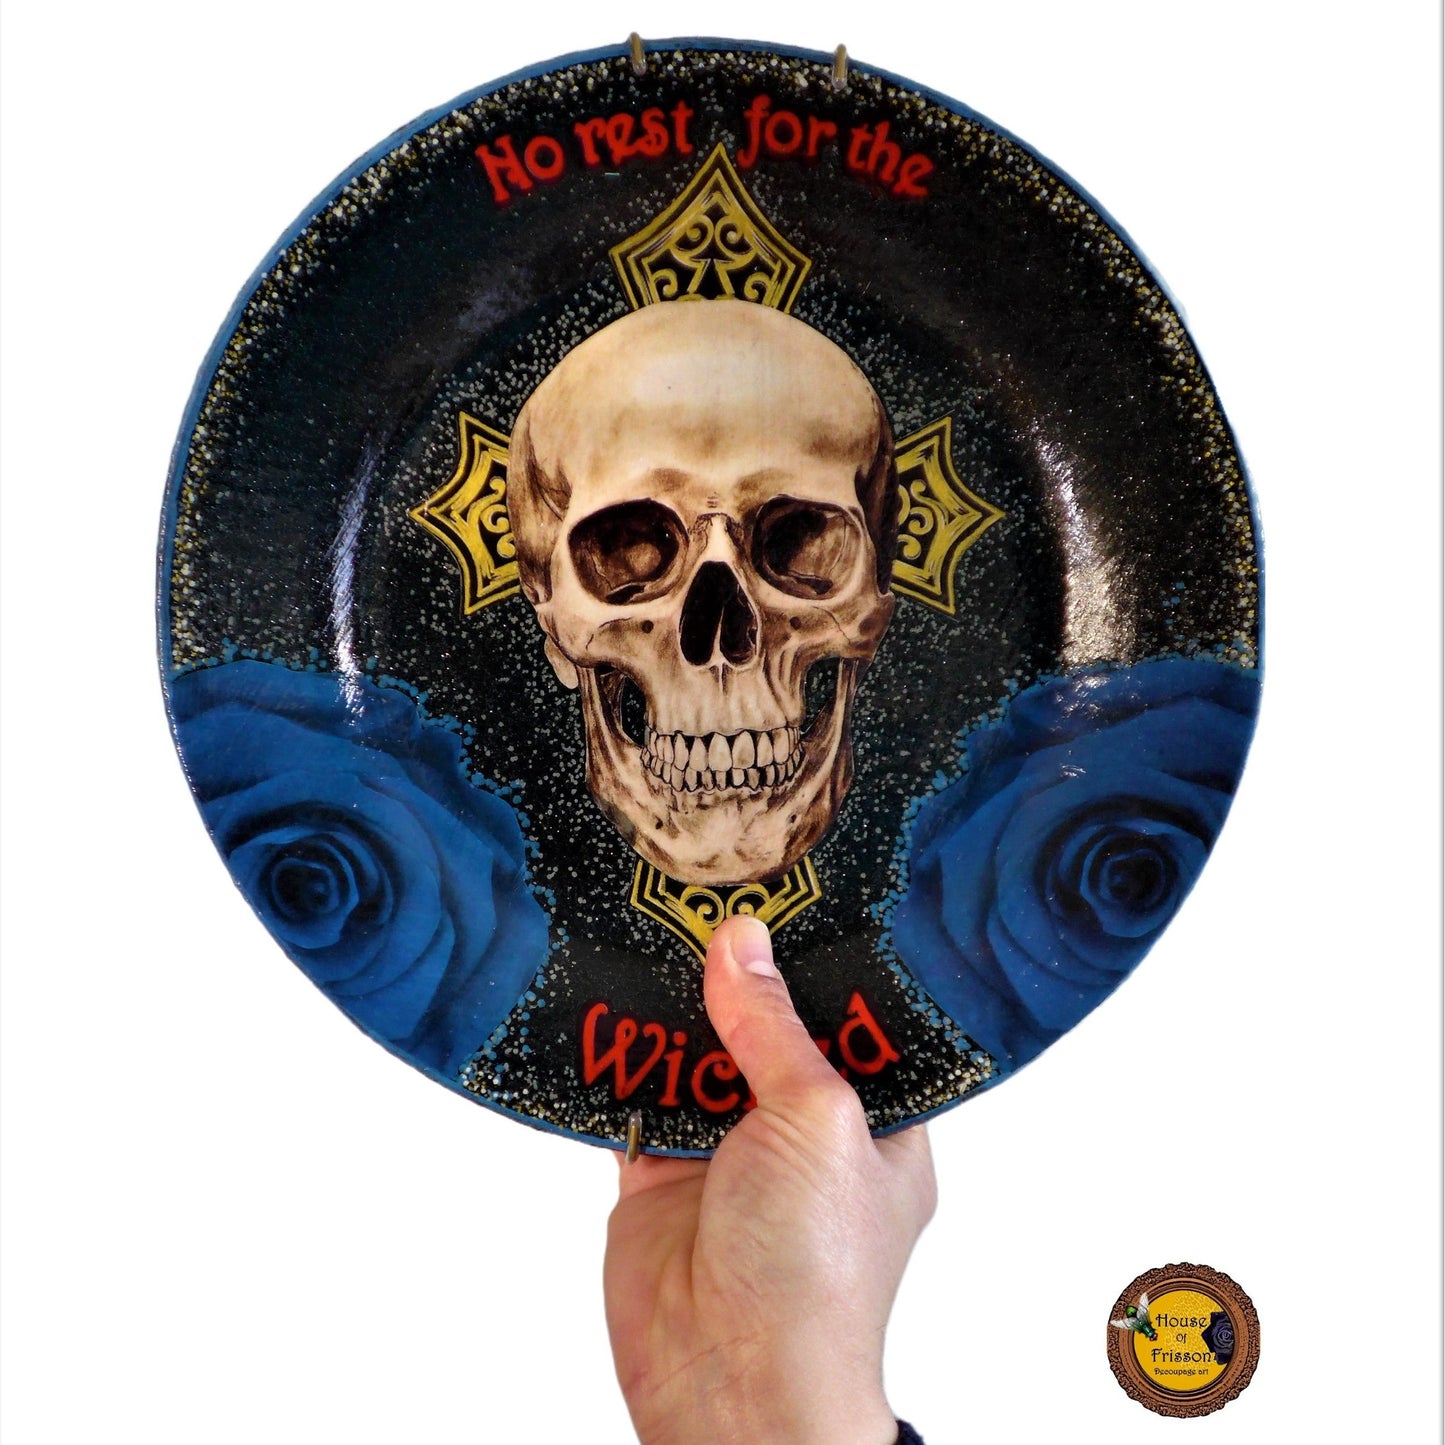 House of Frisson "No Rest For The Wicked" Black Wall Plate front. Collage artwork featuring a skull, a cross, and blue roses, on a black background. Holding the plate.